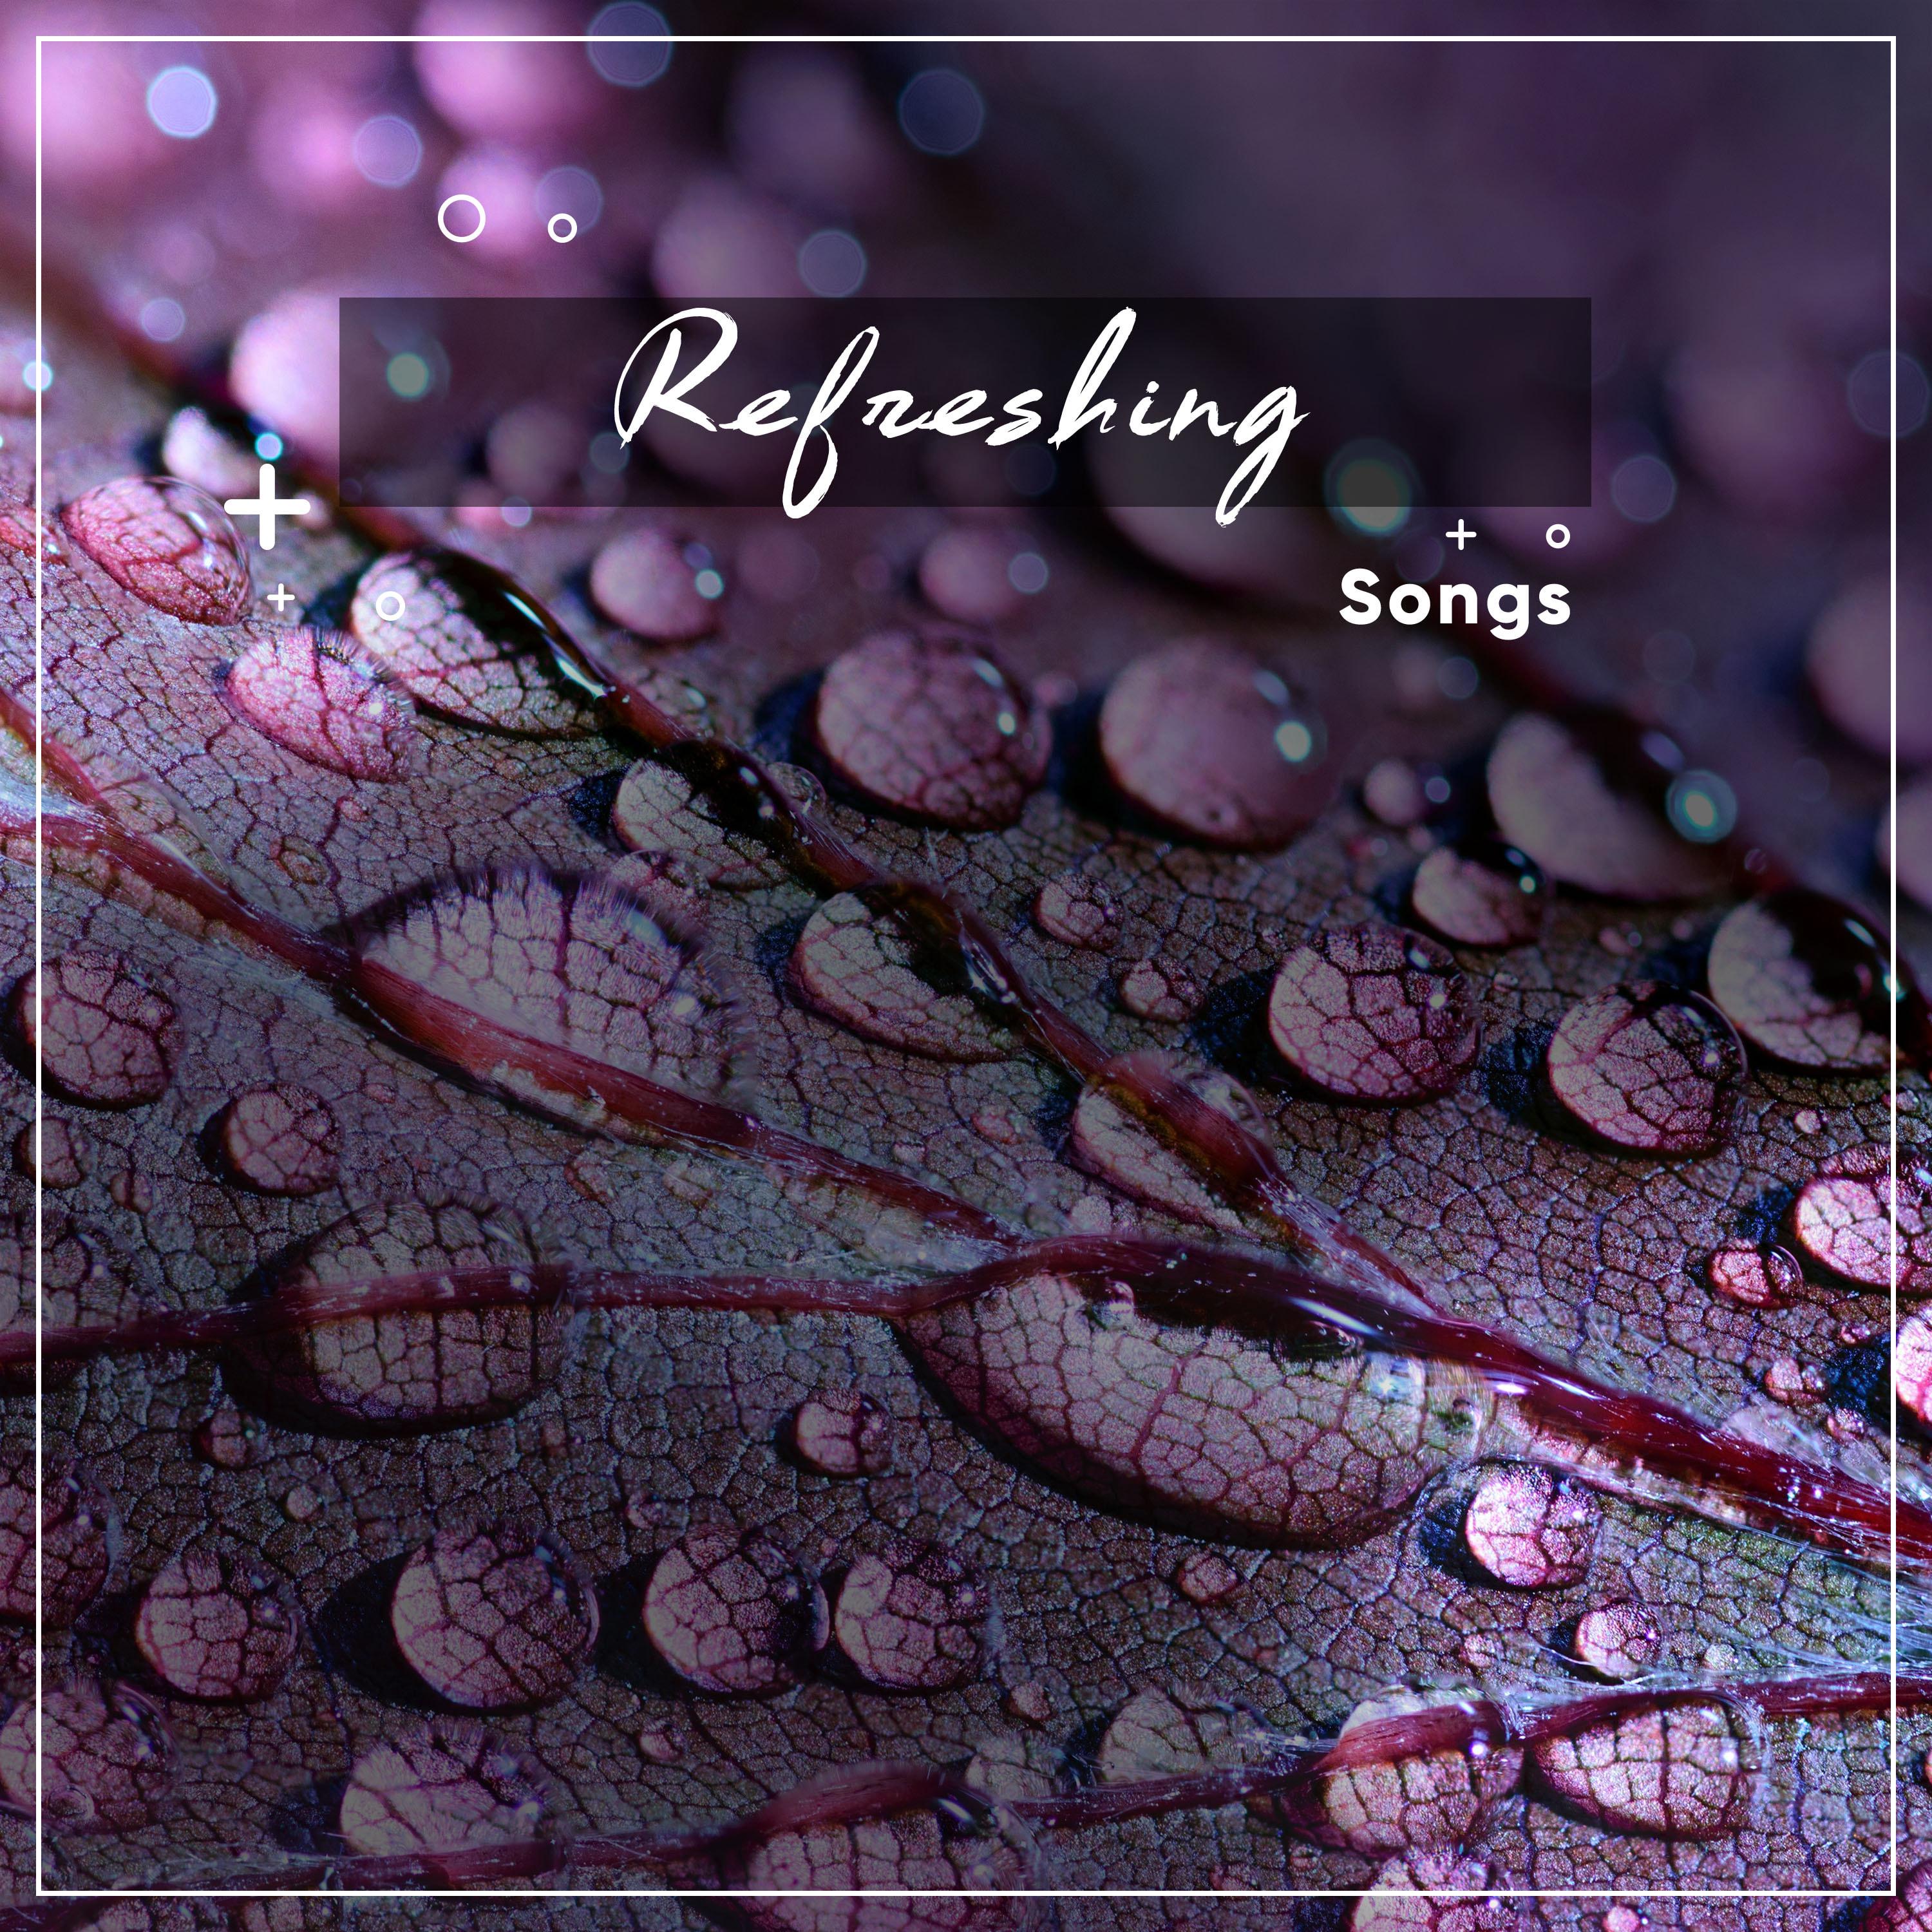 #17 Refreshing Songs for Zen Spa Relaxation